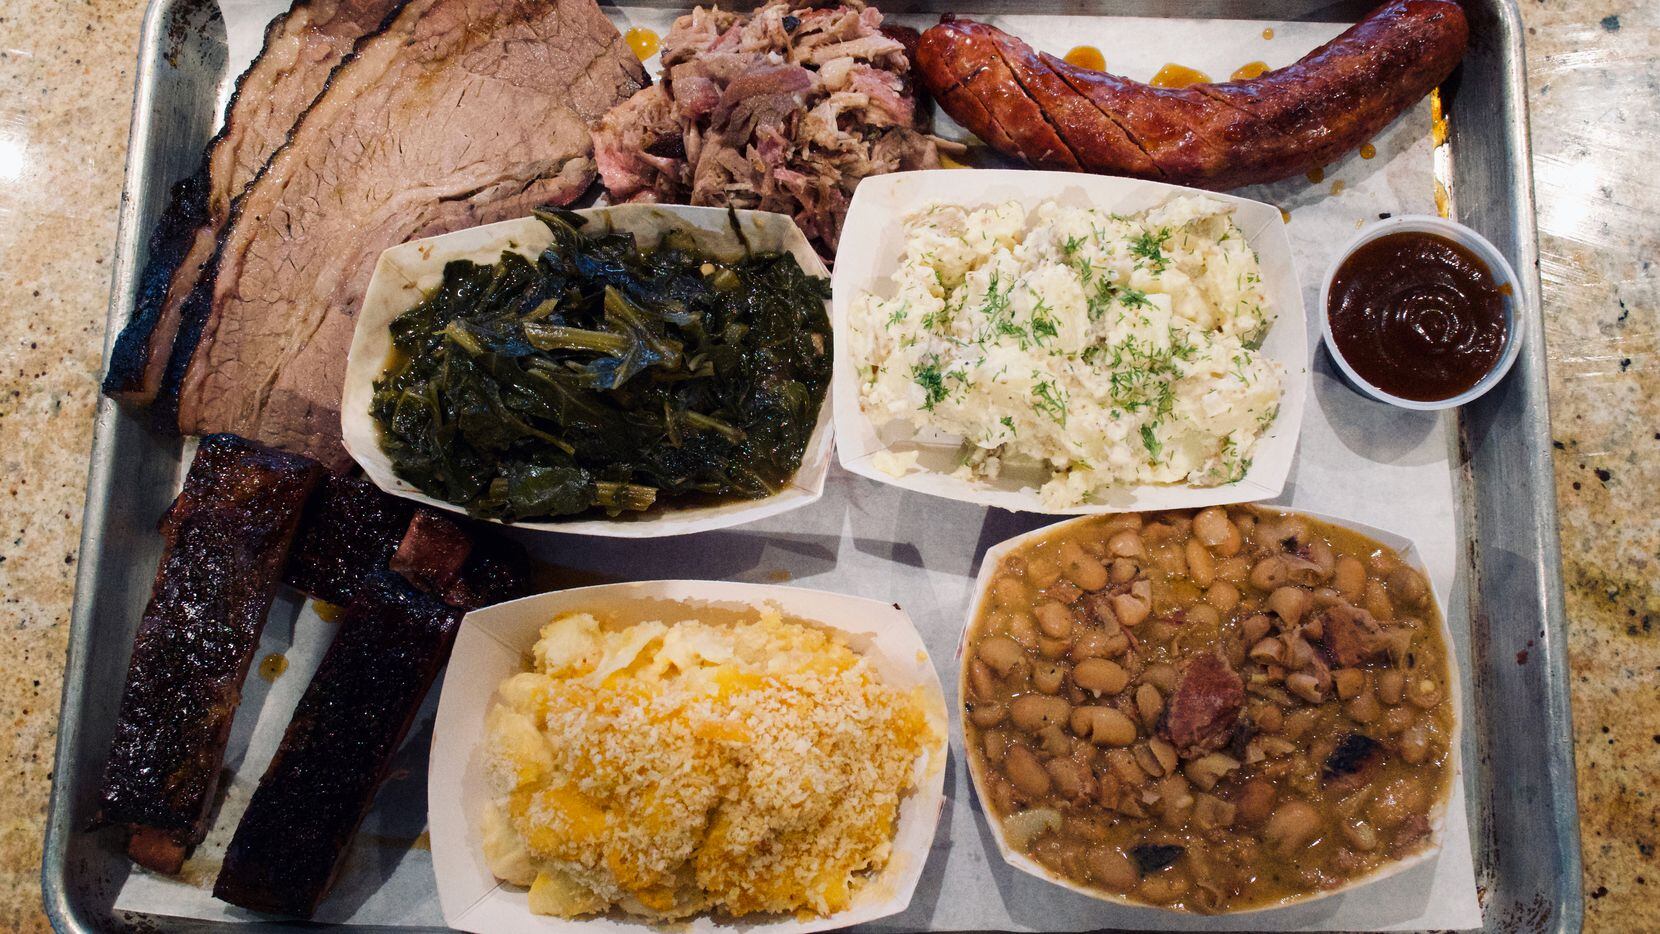 Smoked meat at 42 BBQ Smokehouse + Market can be ordered by the pound or on plates, with...